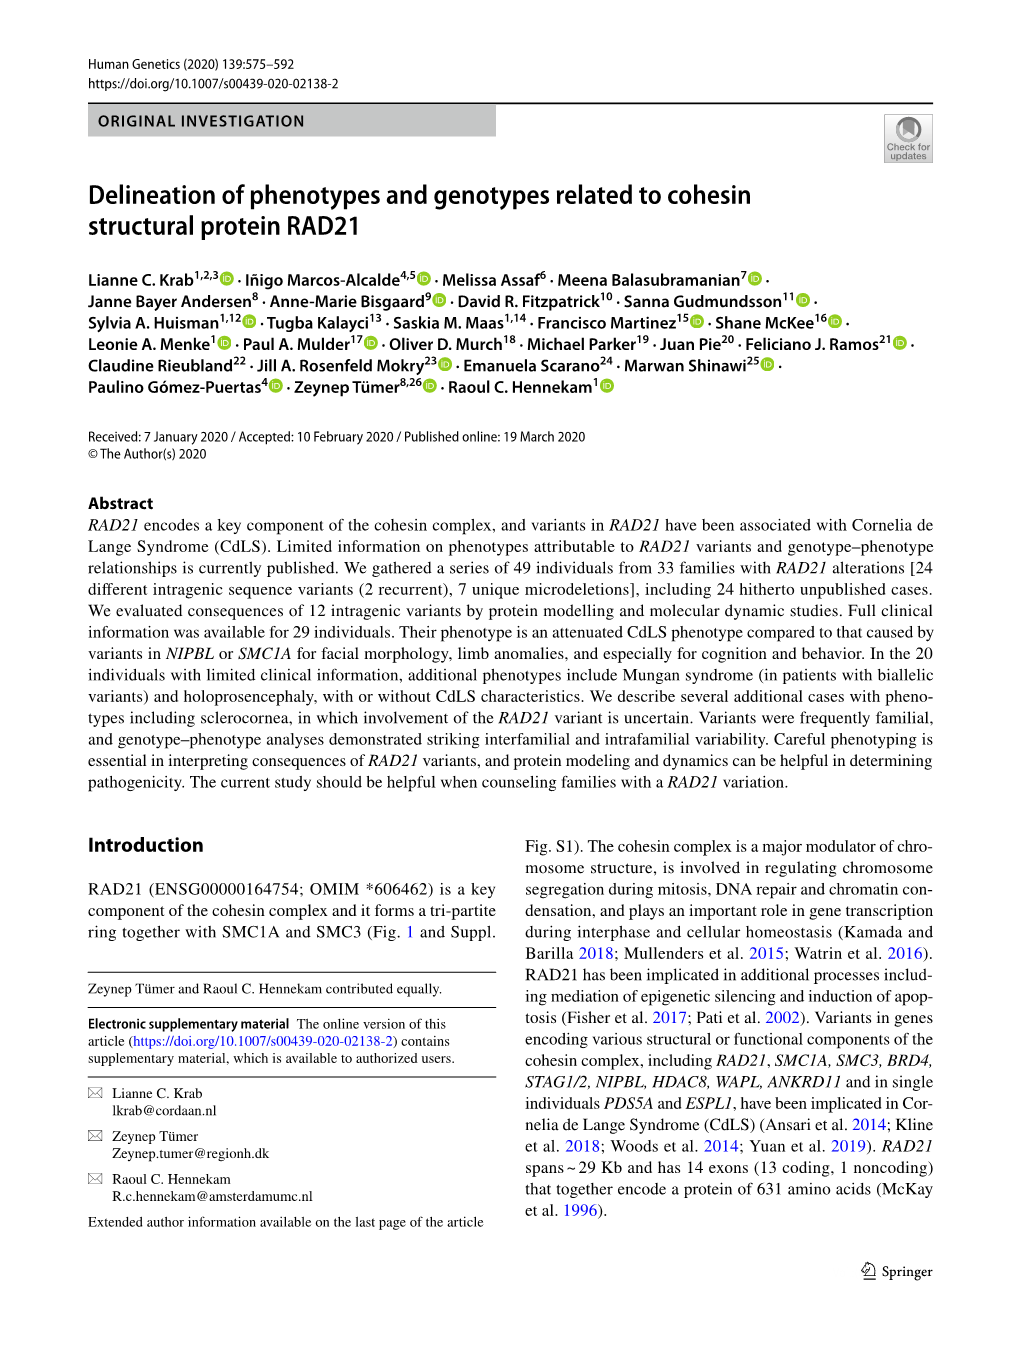 Delineation of Phenotypes and Genotypes Related to Cohesin Structural Protein RAD21